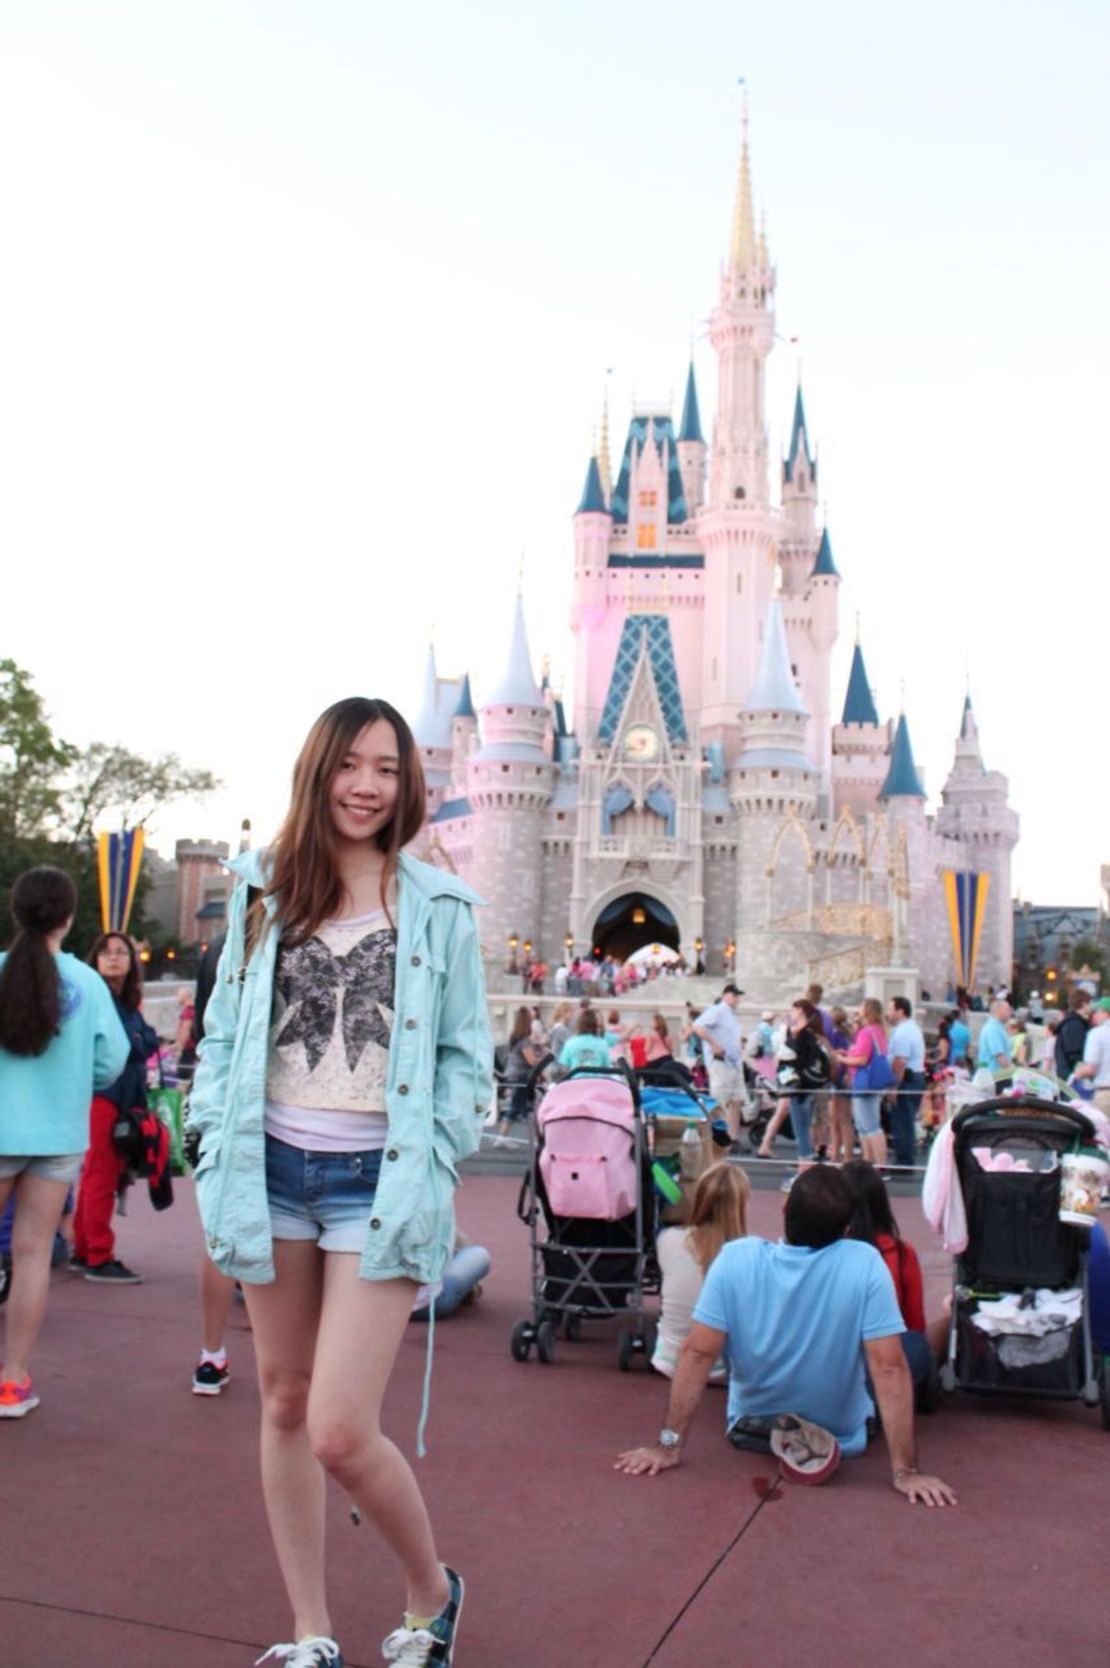 Tong visited Disney World in Orlando while on a break from school last year.